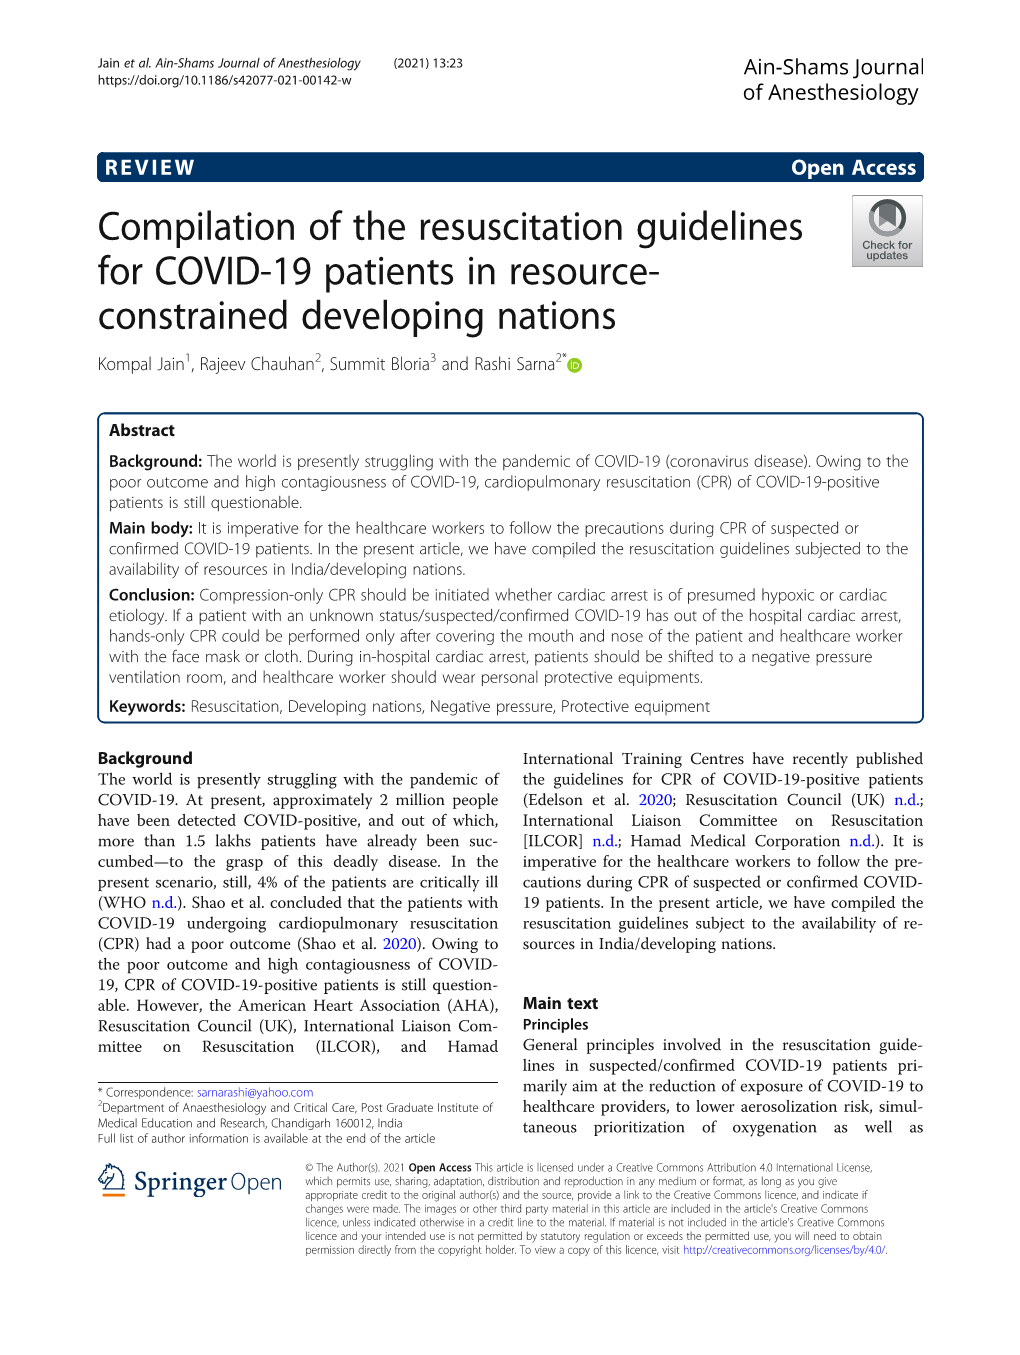 Compilation of the Resuscitation Guidelines for COVID-19 Patients In